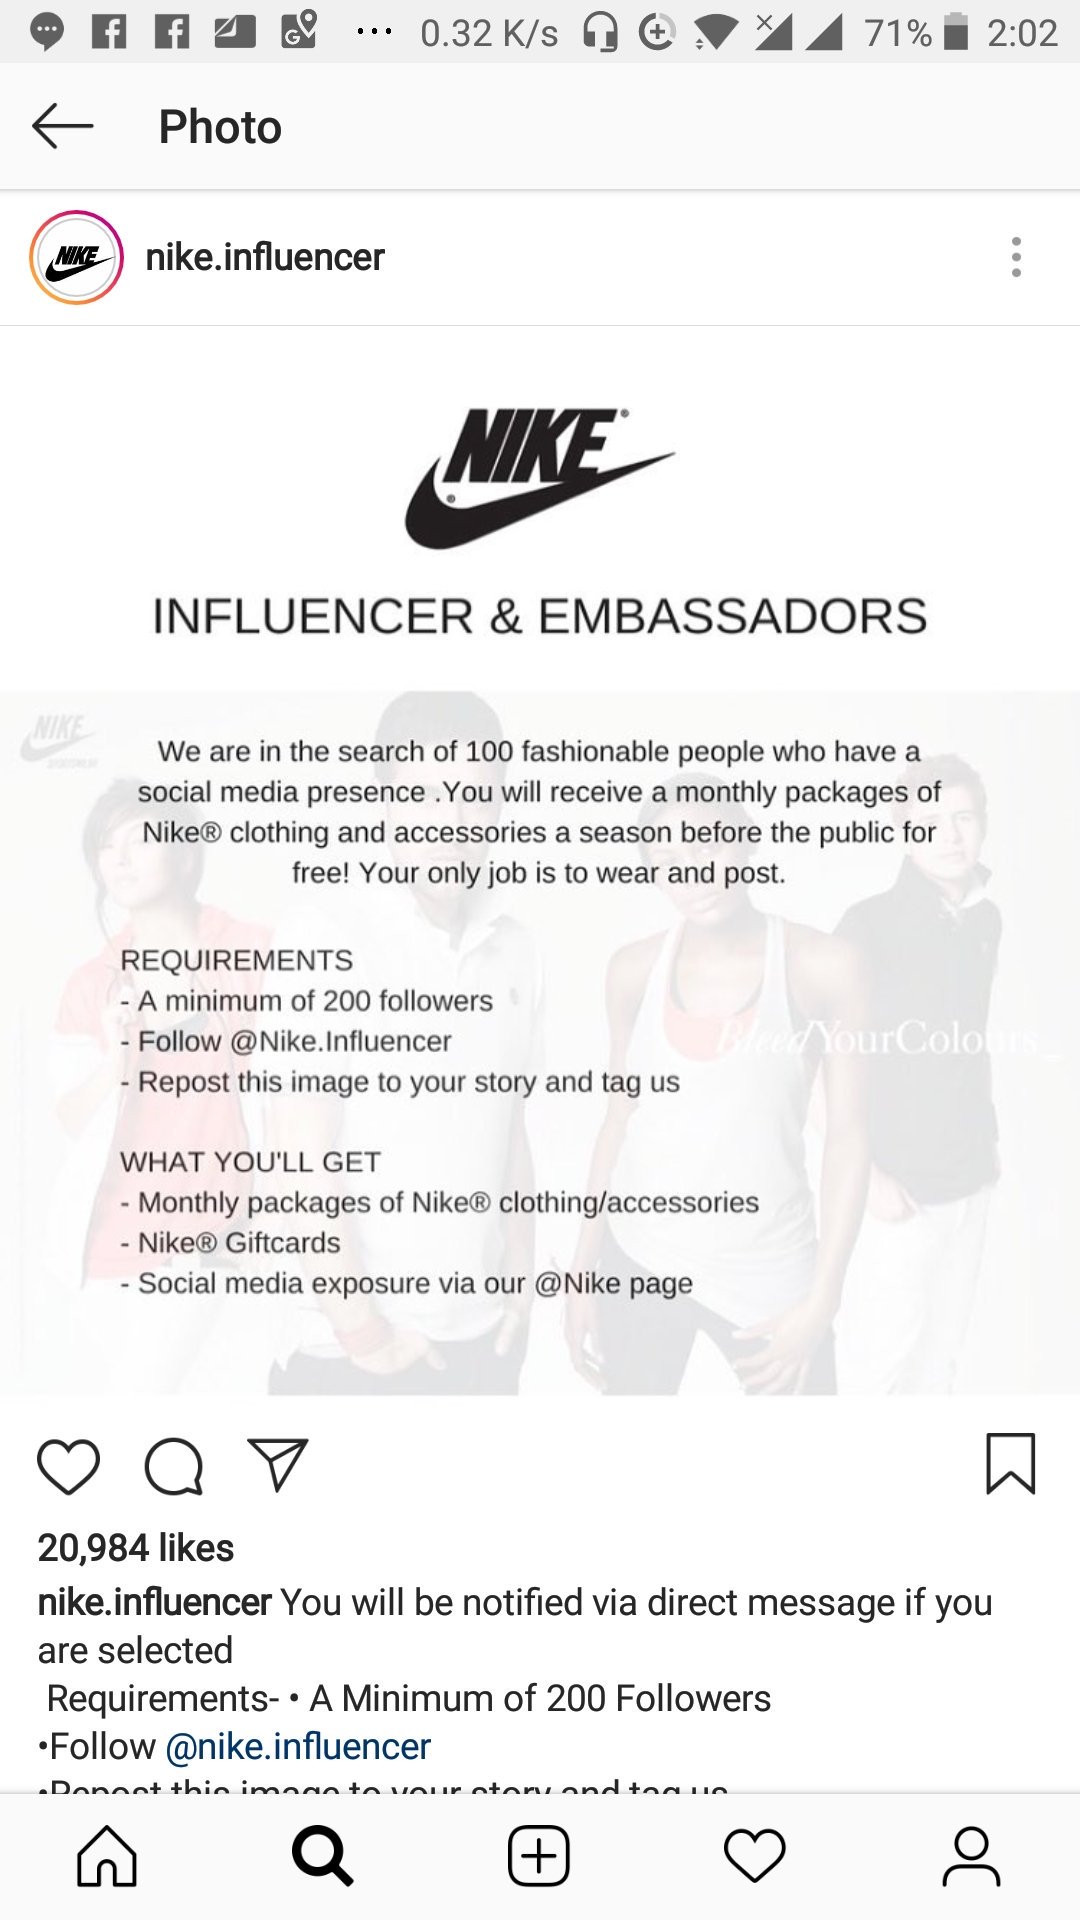 Madison Verwaand maïs Twitter 上的Nike："@sangamman That's not an official Nike promotion or  account. Keep it locked to your NikePlus email for future promotions and  offers." / Twitter